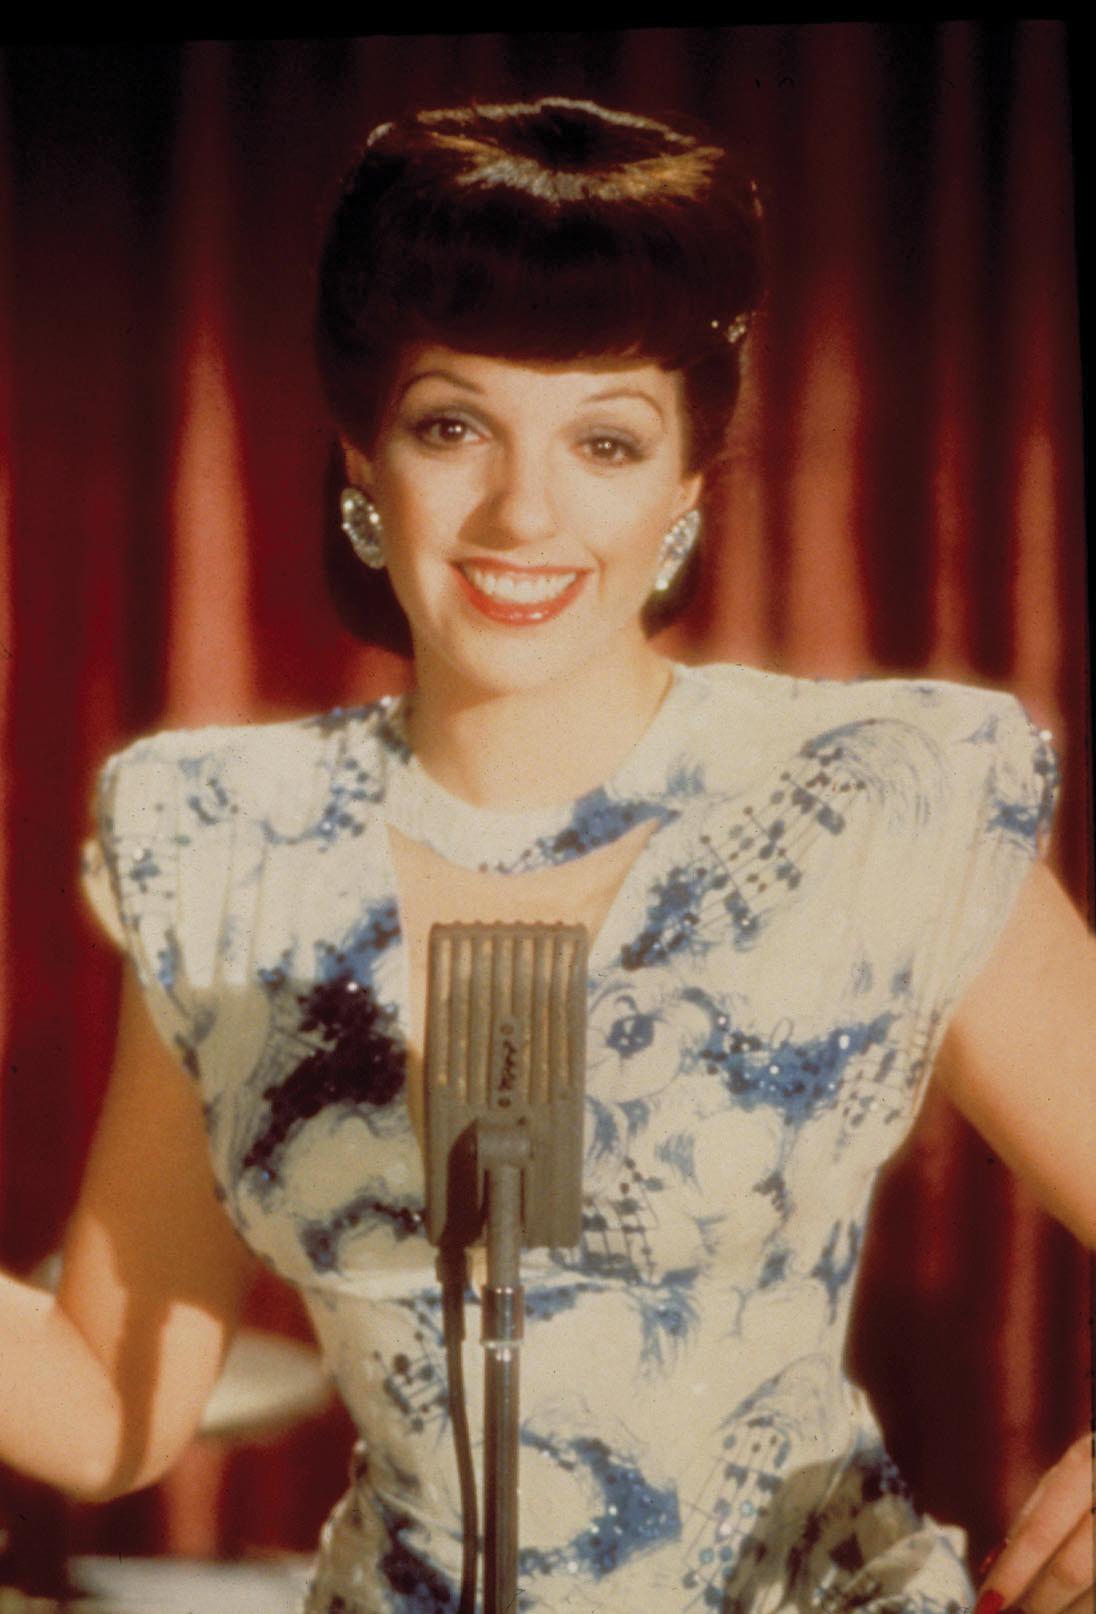 Minnelli with a beehive hairdo, wearing a blue, flowered dress, in front of a microphone, red curtain in the background